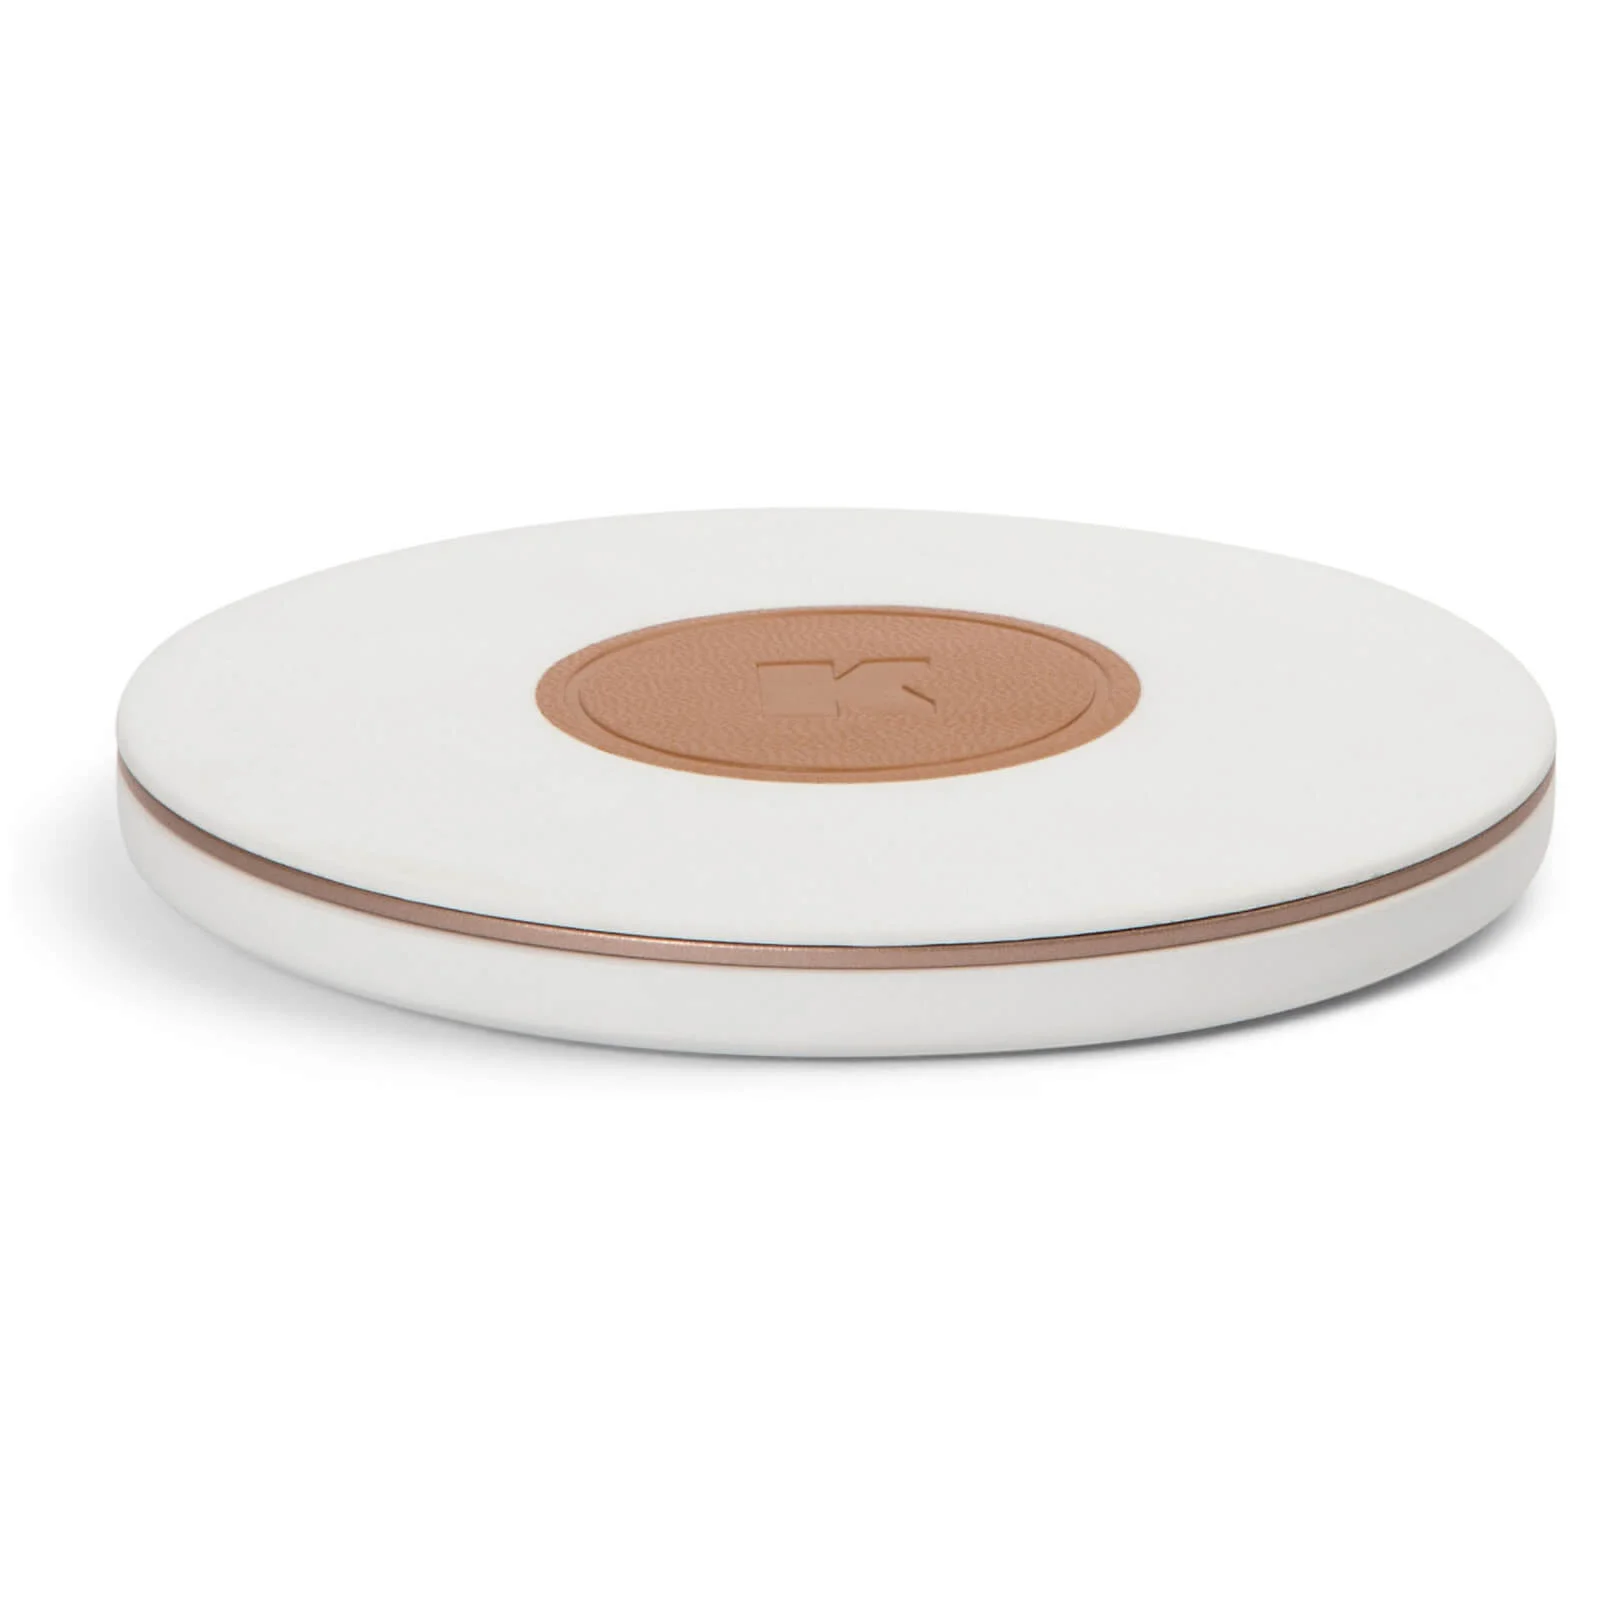 Kreafunk wiCHARGE Fast Wireless Charger - White Image 1